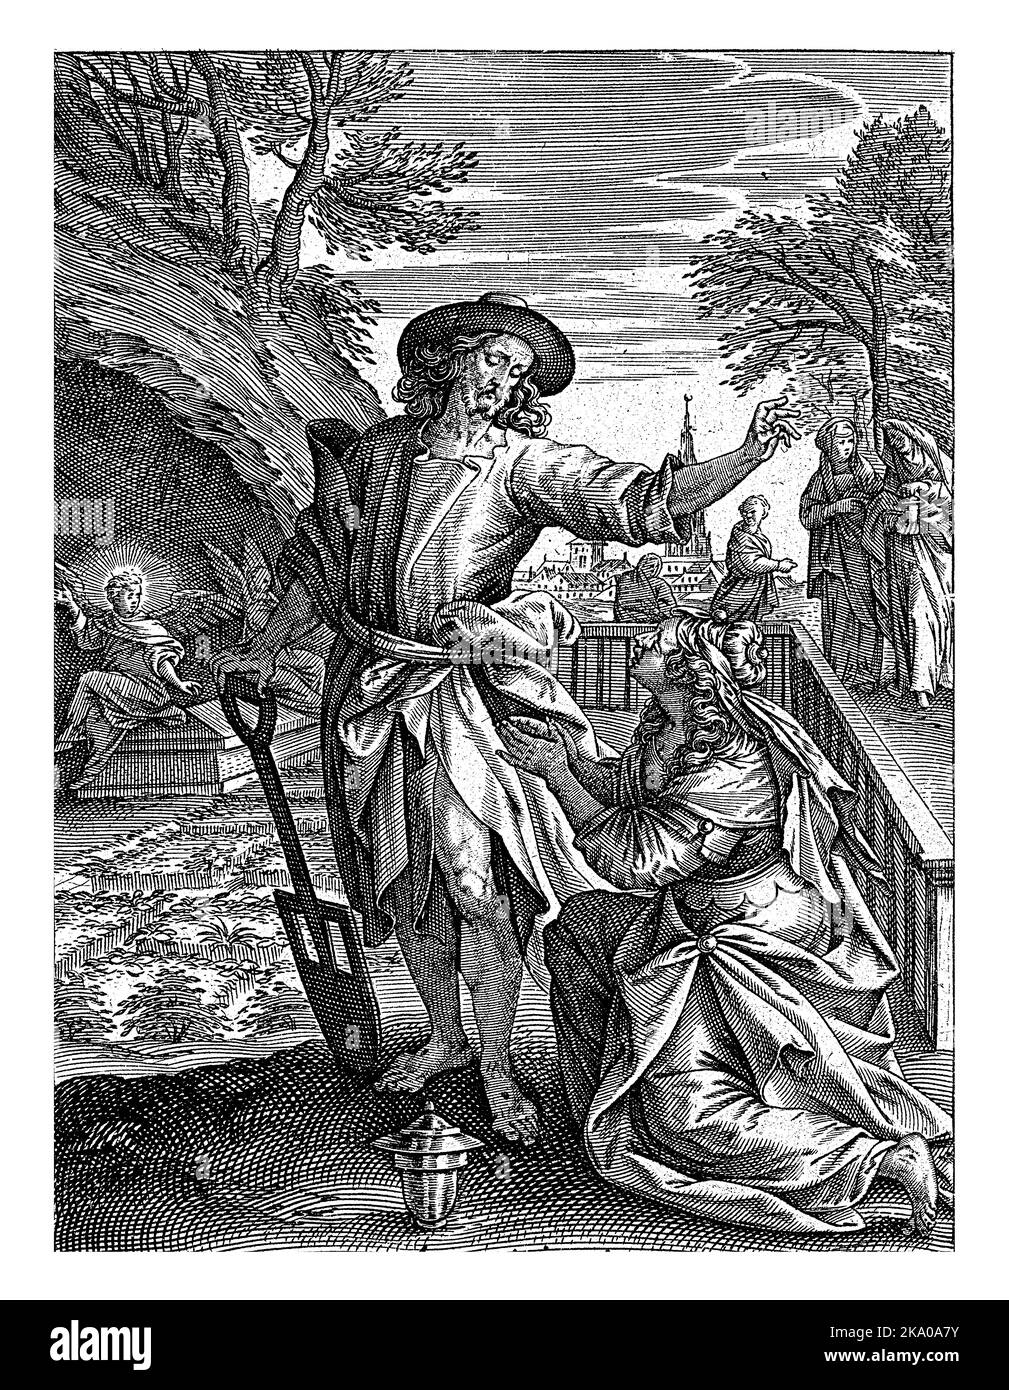 After the Rebellion, Christ appears as a gardener to Mary Magdalene. She is kneeling before Christ in a garden. Stock Photo